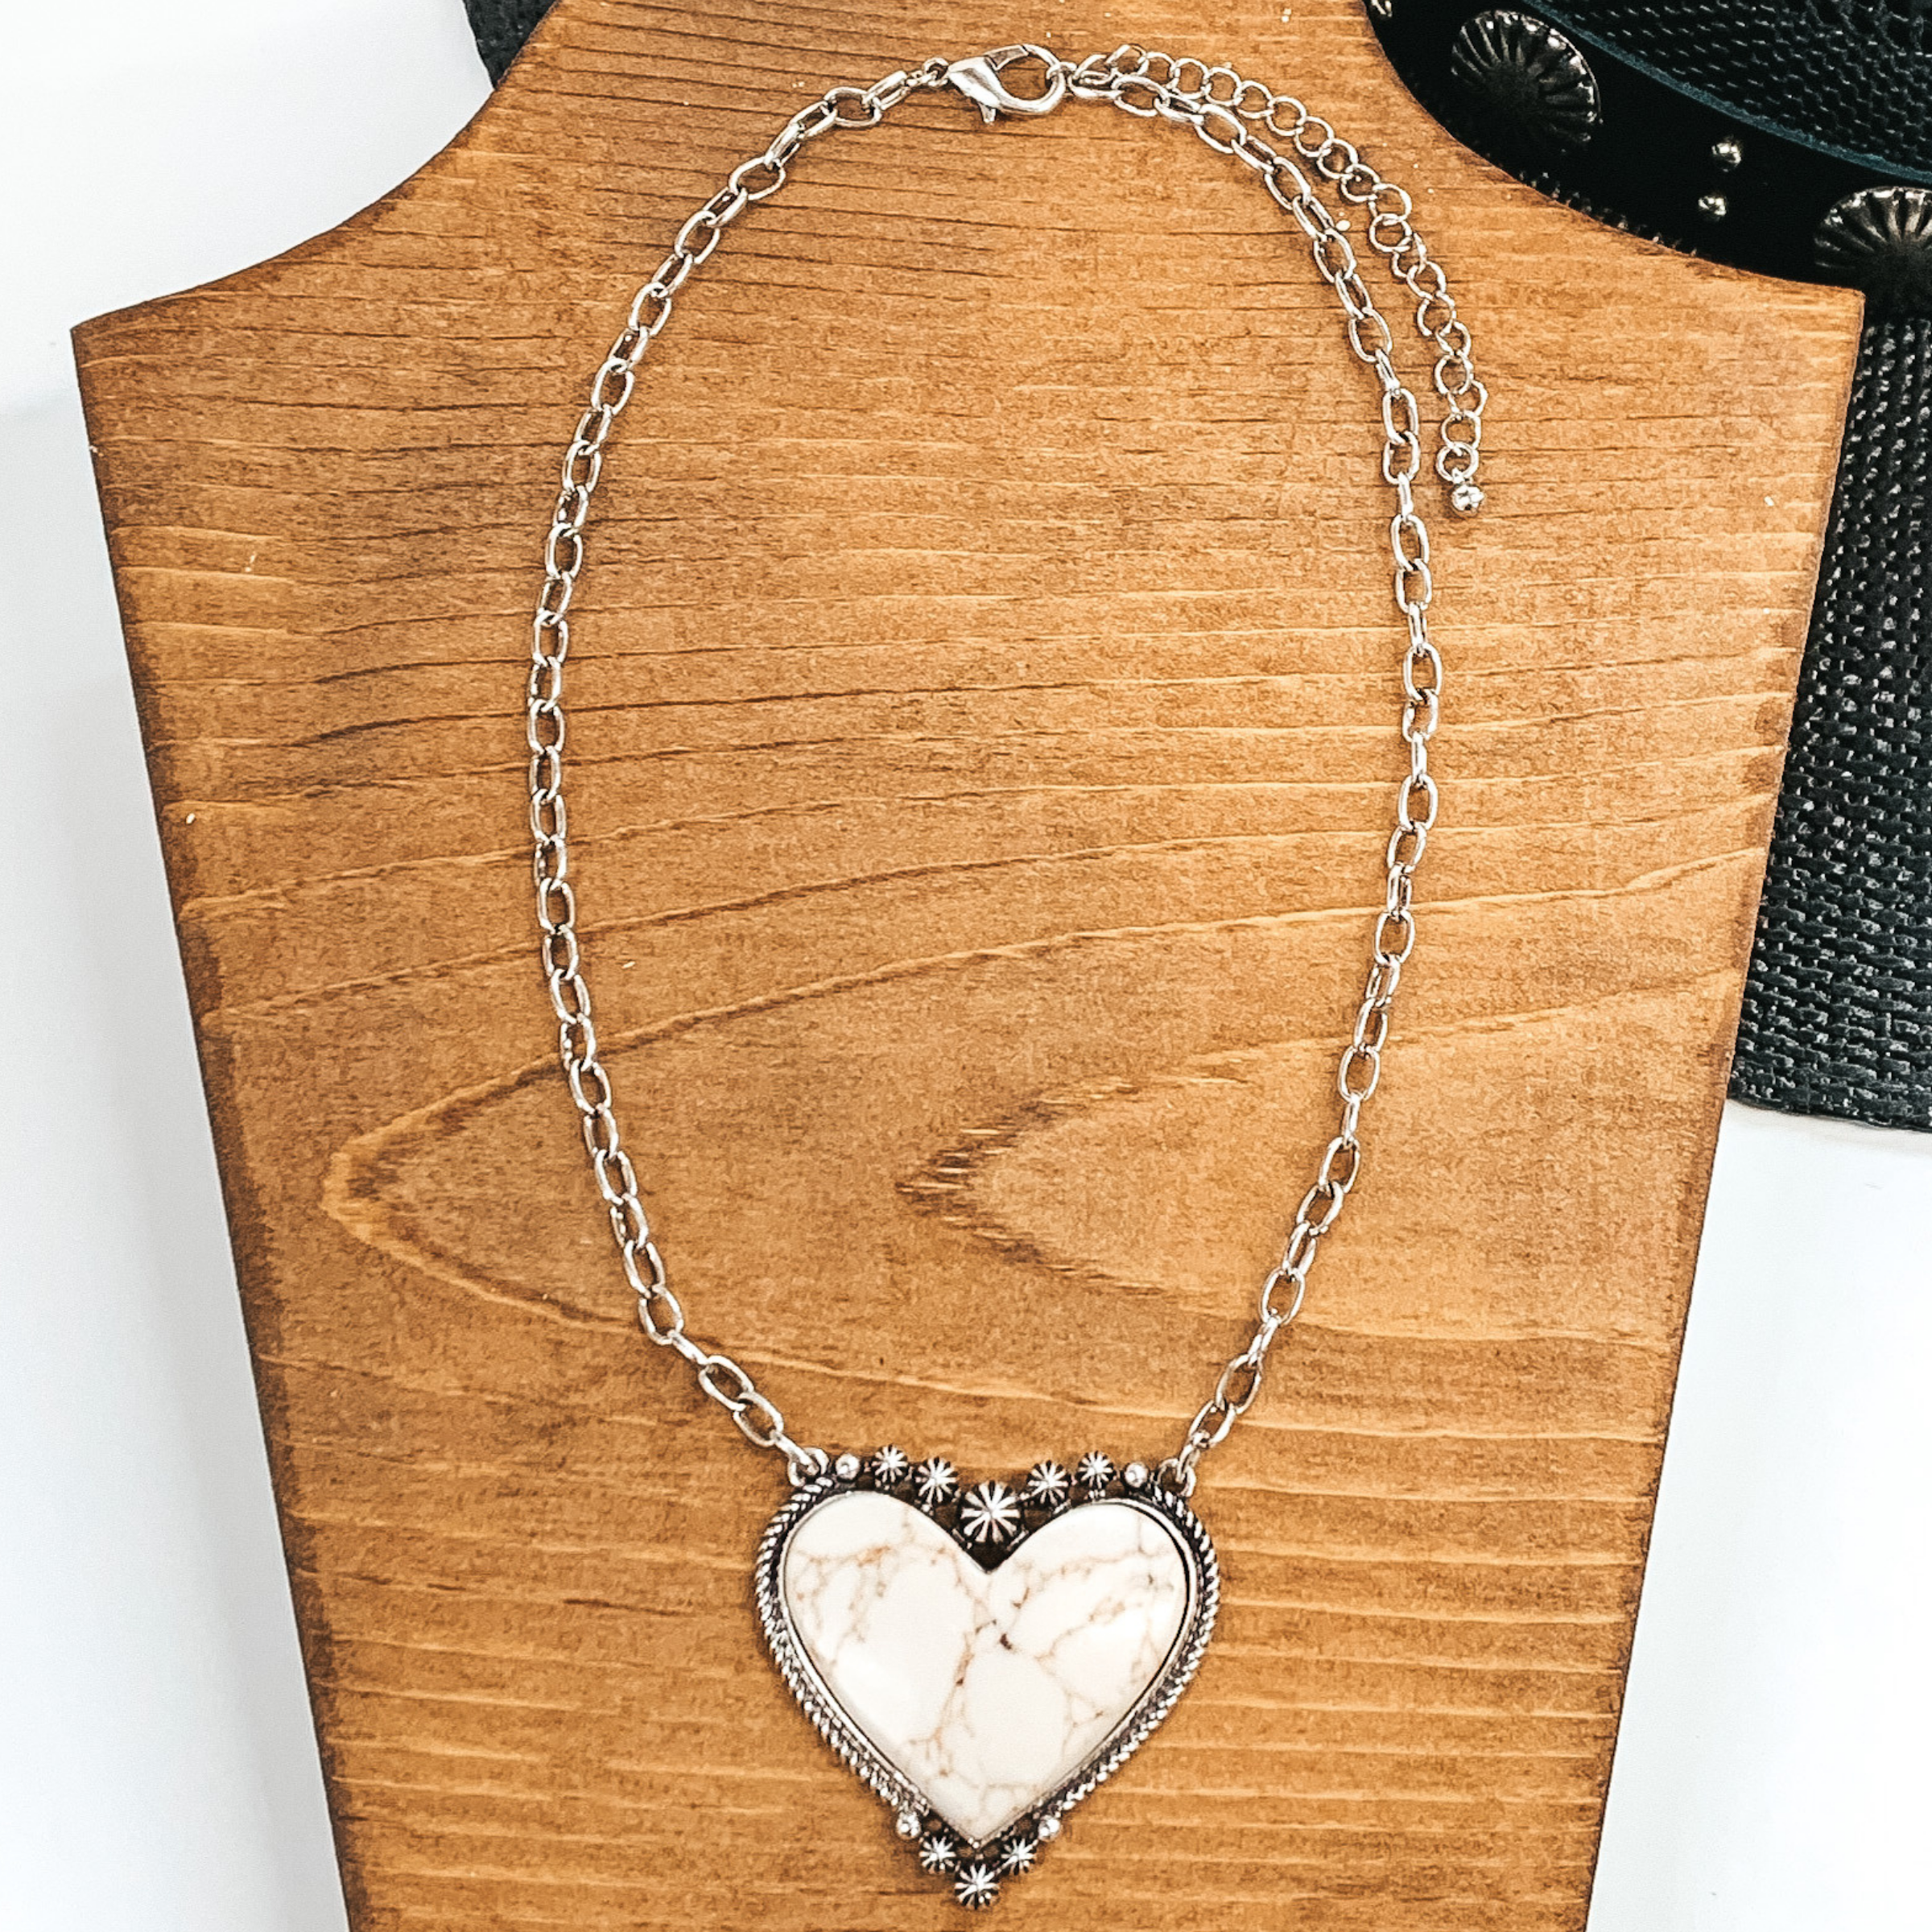 Silver chained necklace with heart pendant. The heart pendant is outlined in silver with an ivory stone. This necklace is pictured on a wood necklace holder on a white and black background.